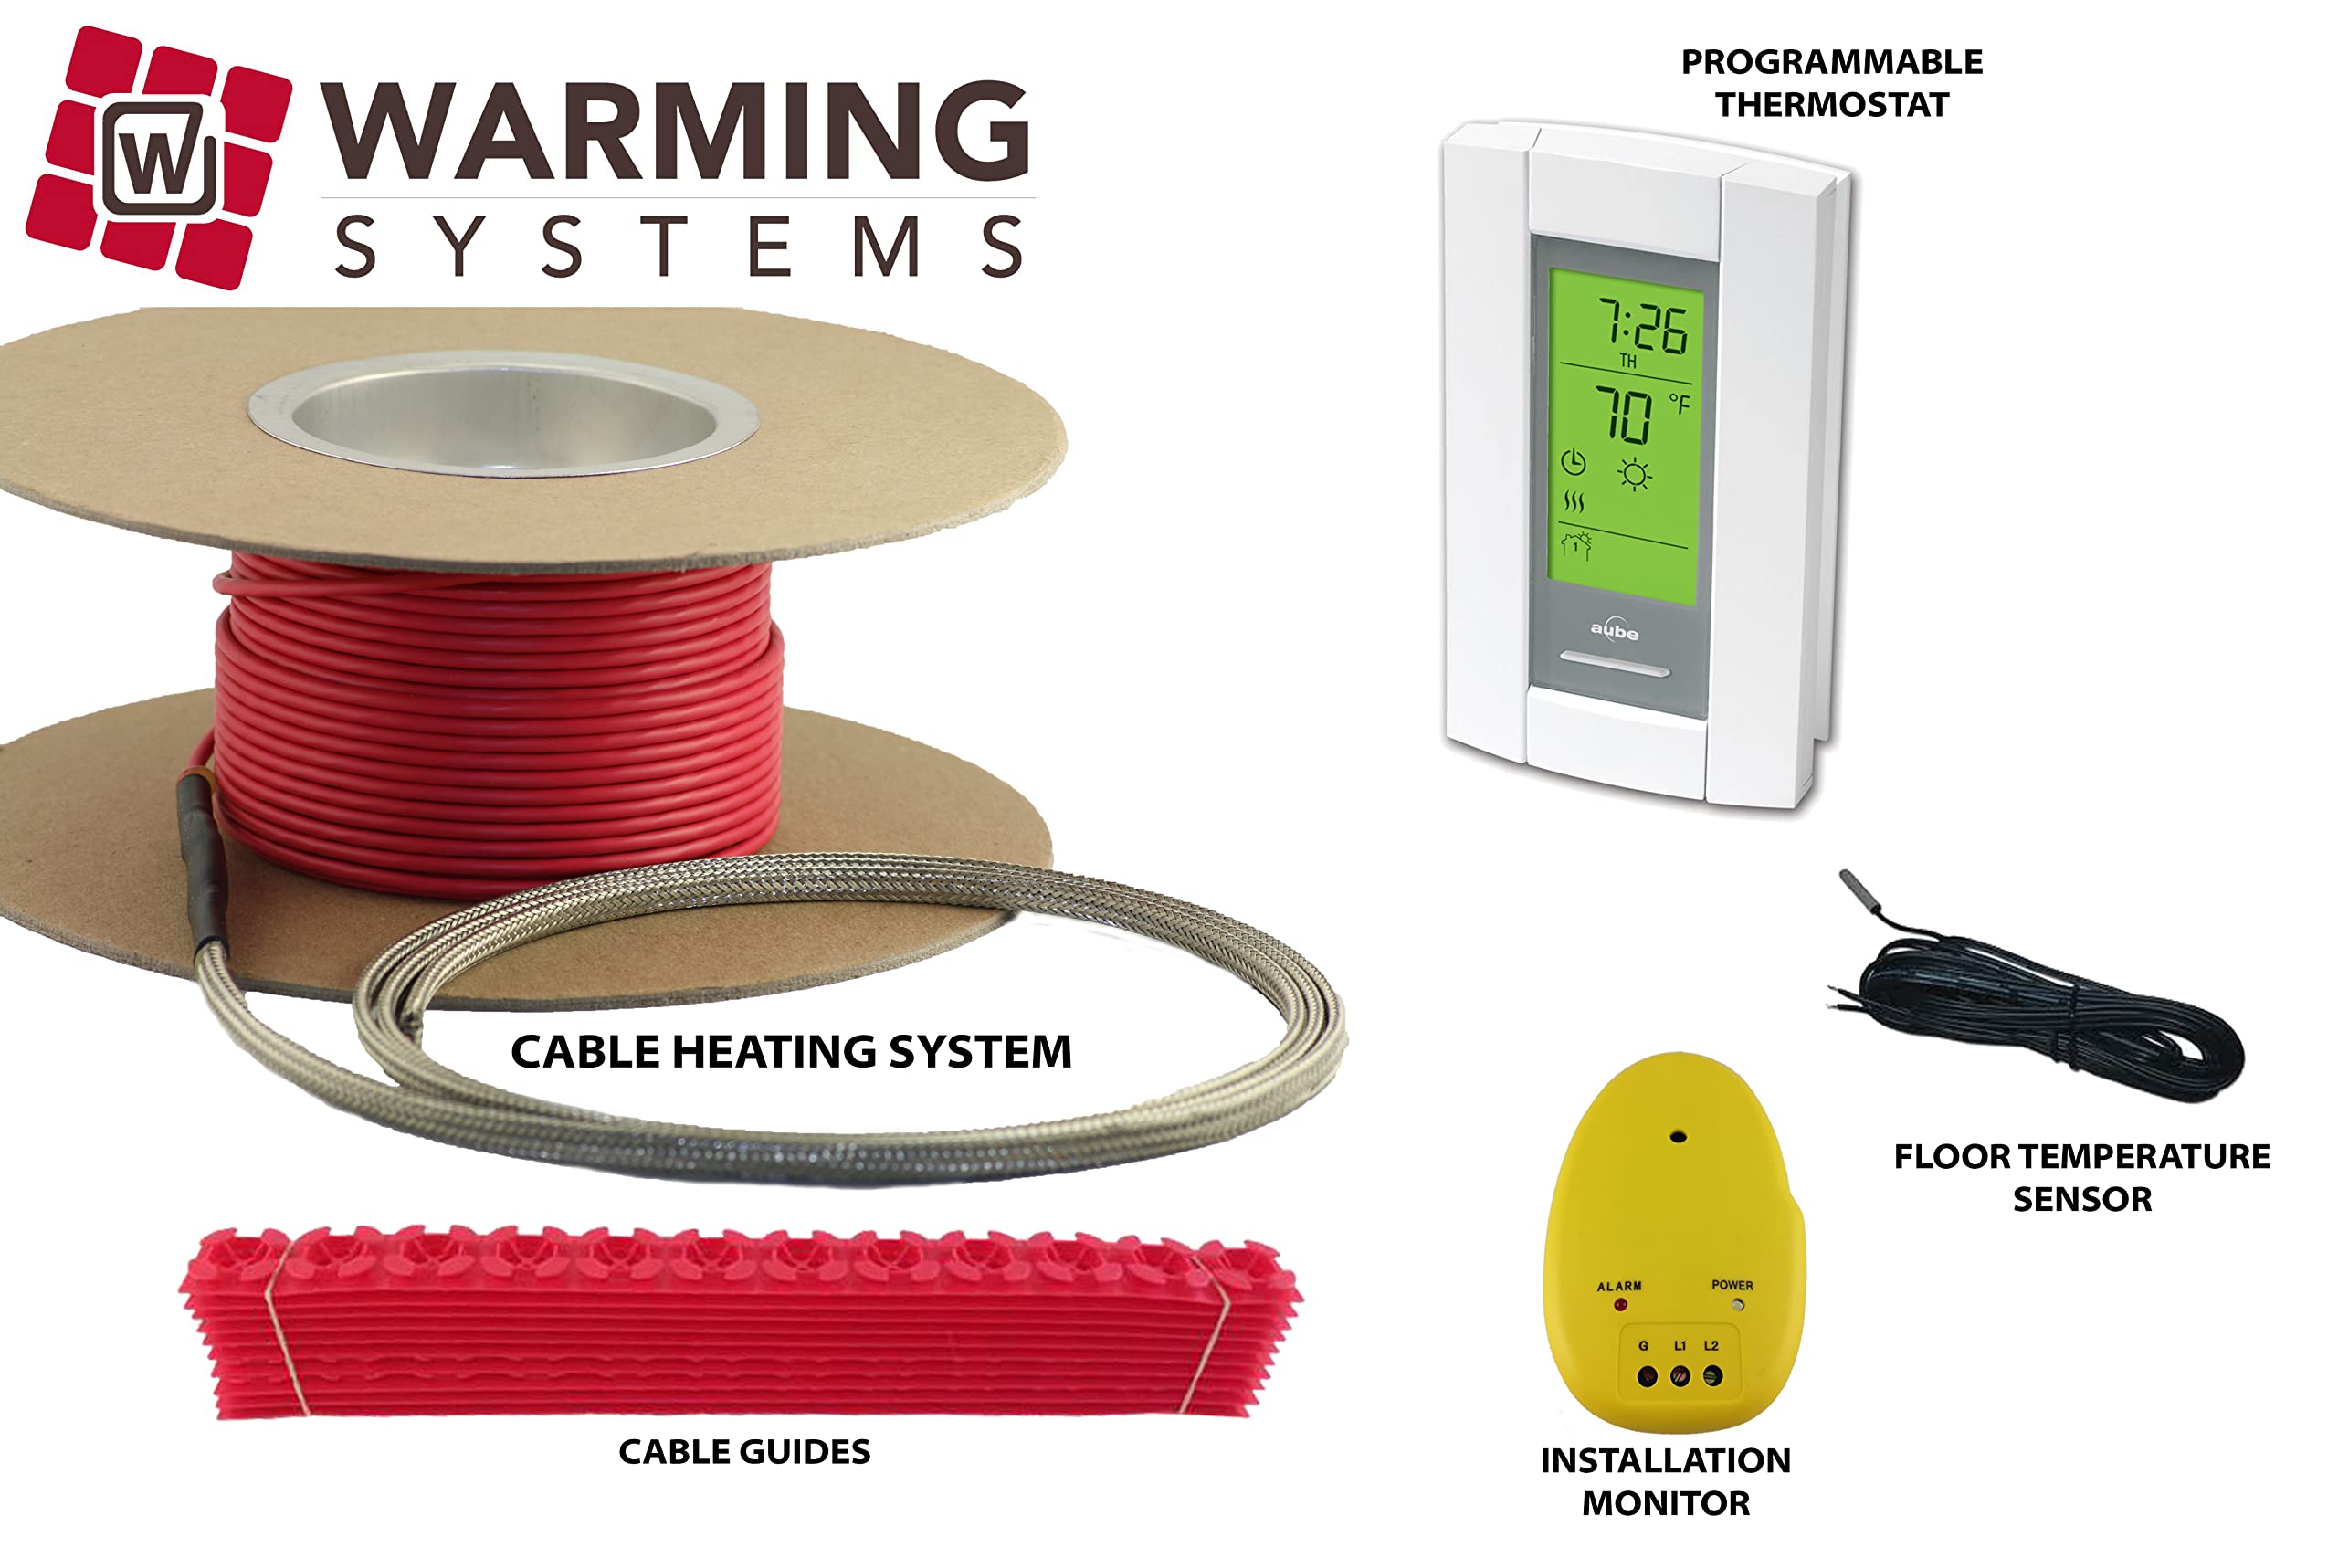 50 Sqft Cable Set, Electric Radiant Floor Heat Heating System with Digital Floor Sensing Thermostat